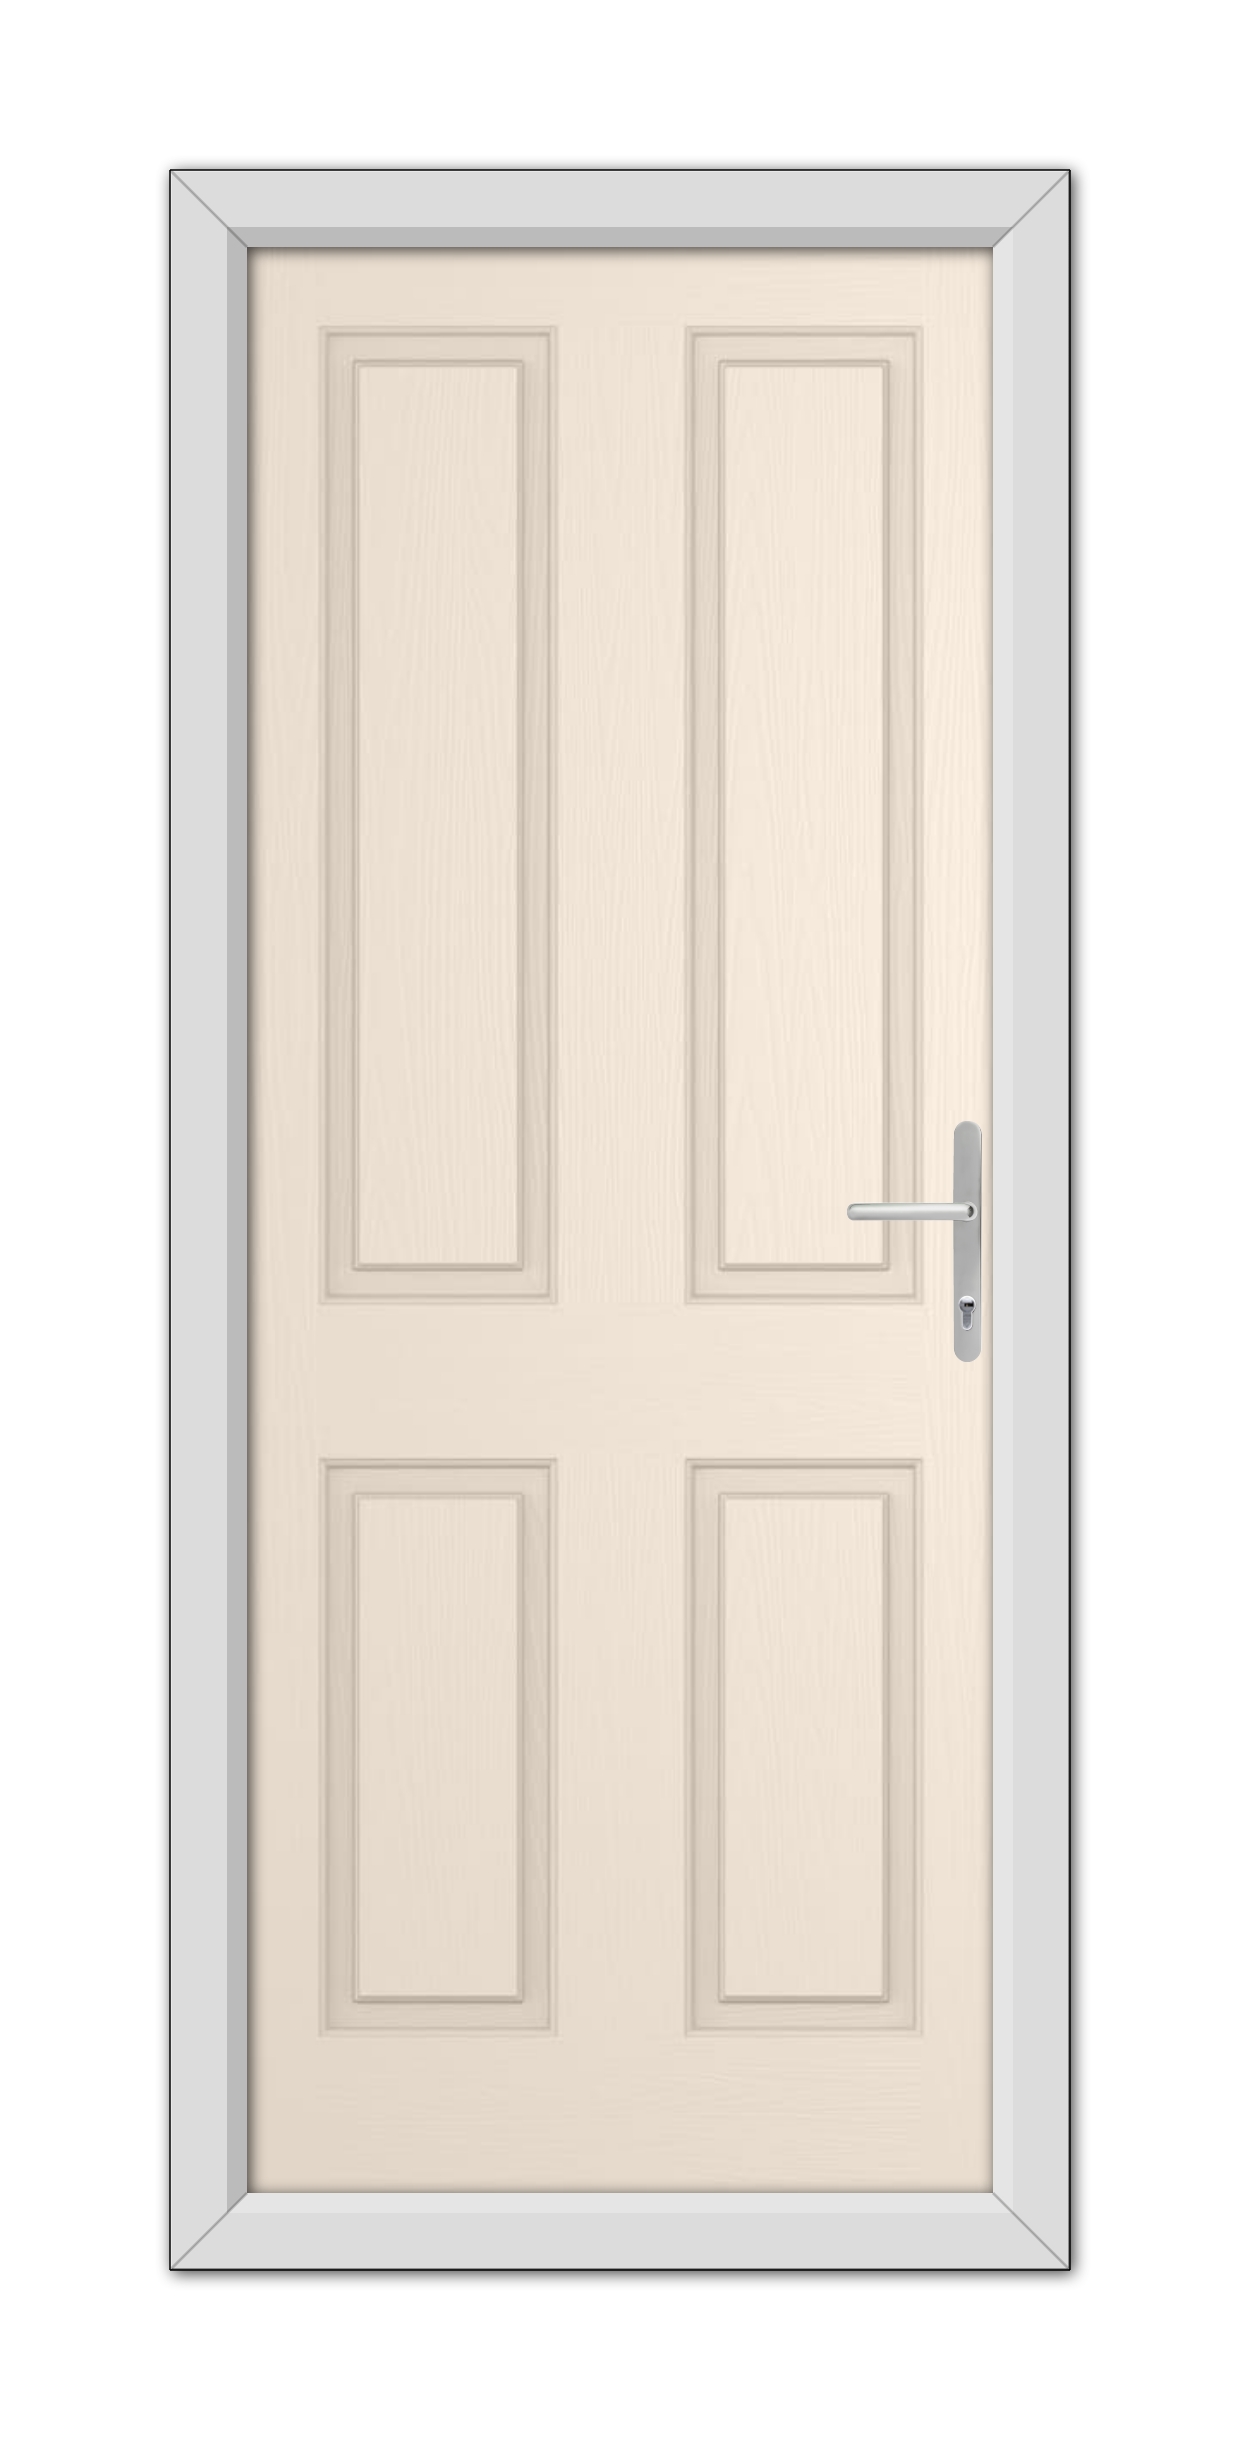 A closed Cream Whitmore Solid Composite Door 48mm Timber Core with a metal handle, set in a plain gray frame, isolated on a white background.